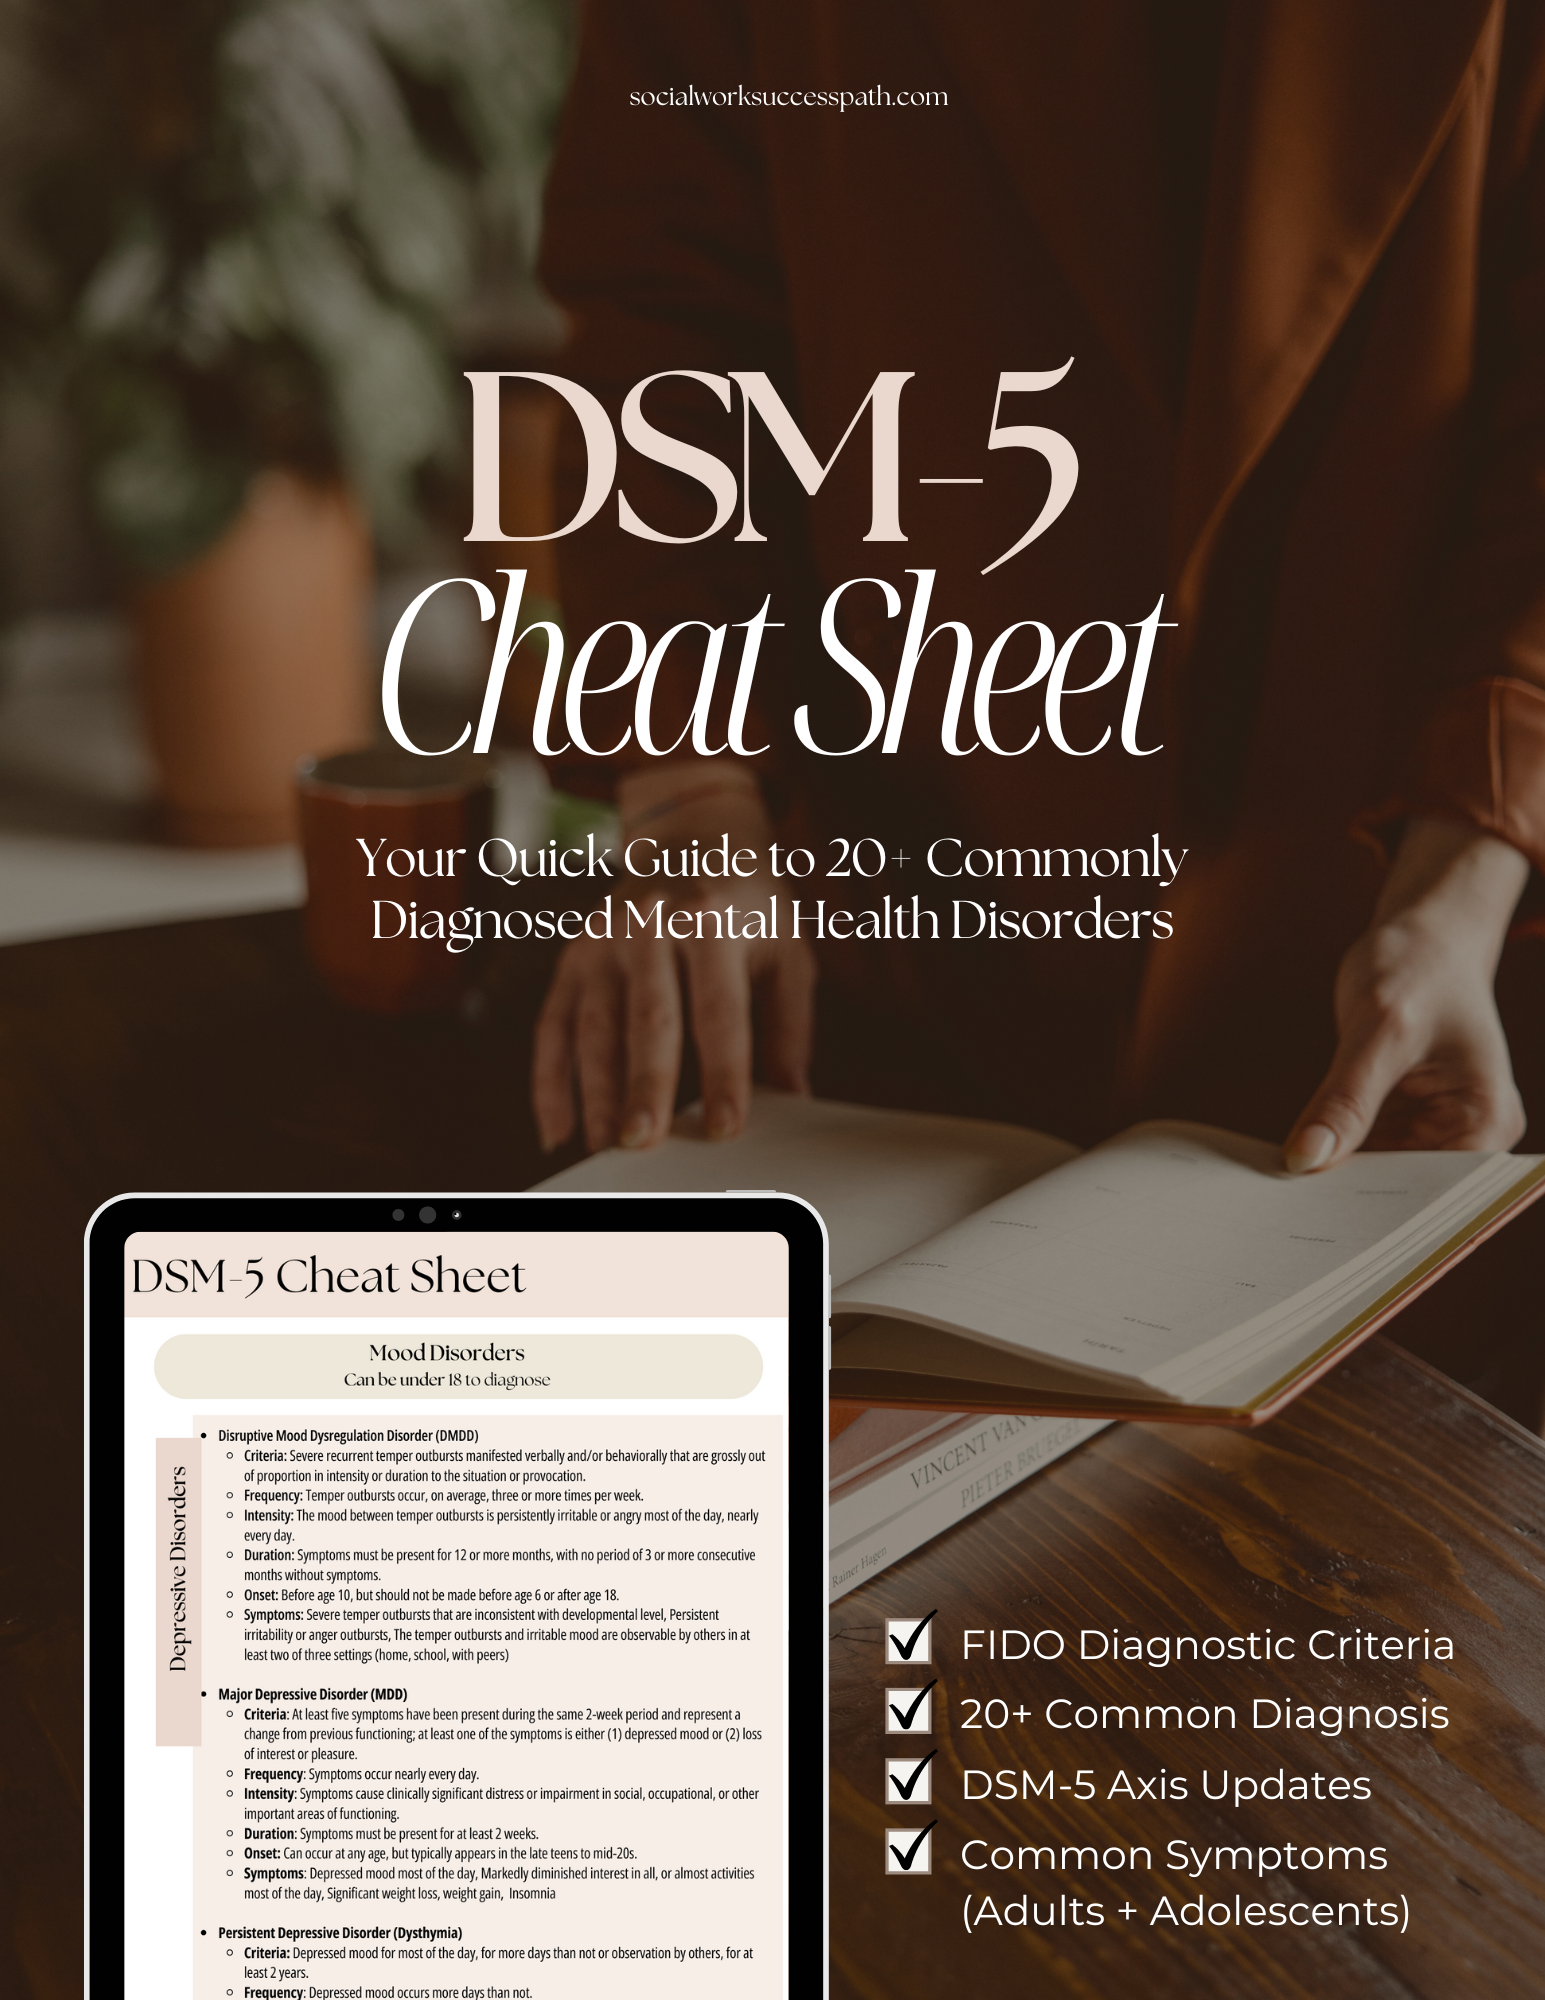 "Image of a DSM-5 cheat sheet PDF featuring 20 mental health diagnoses, including brief descriptions and diagnostic criteria for each condition. This resource aims to provide a quick reference guide for mental health professionals and new therapists.